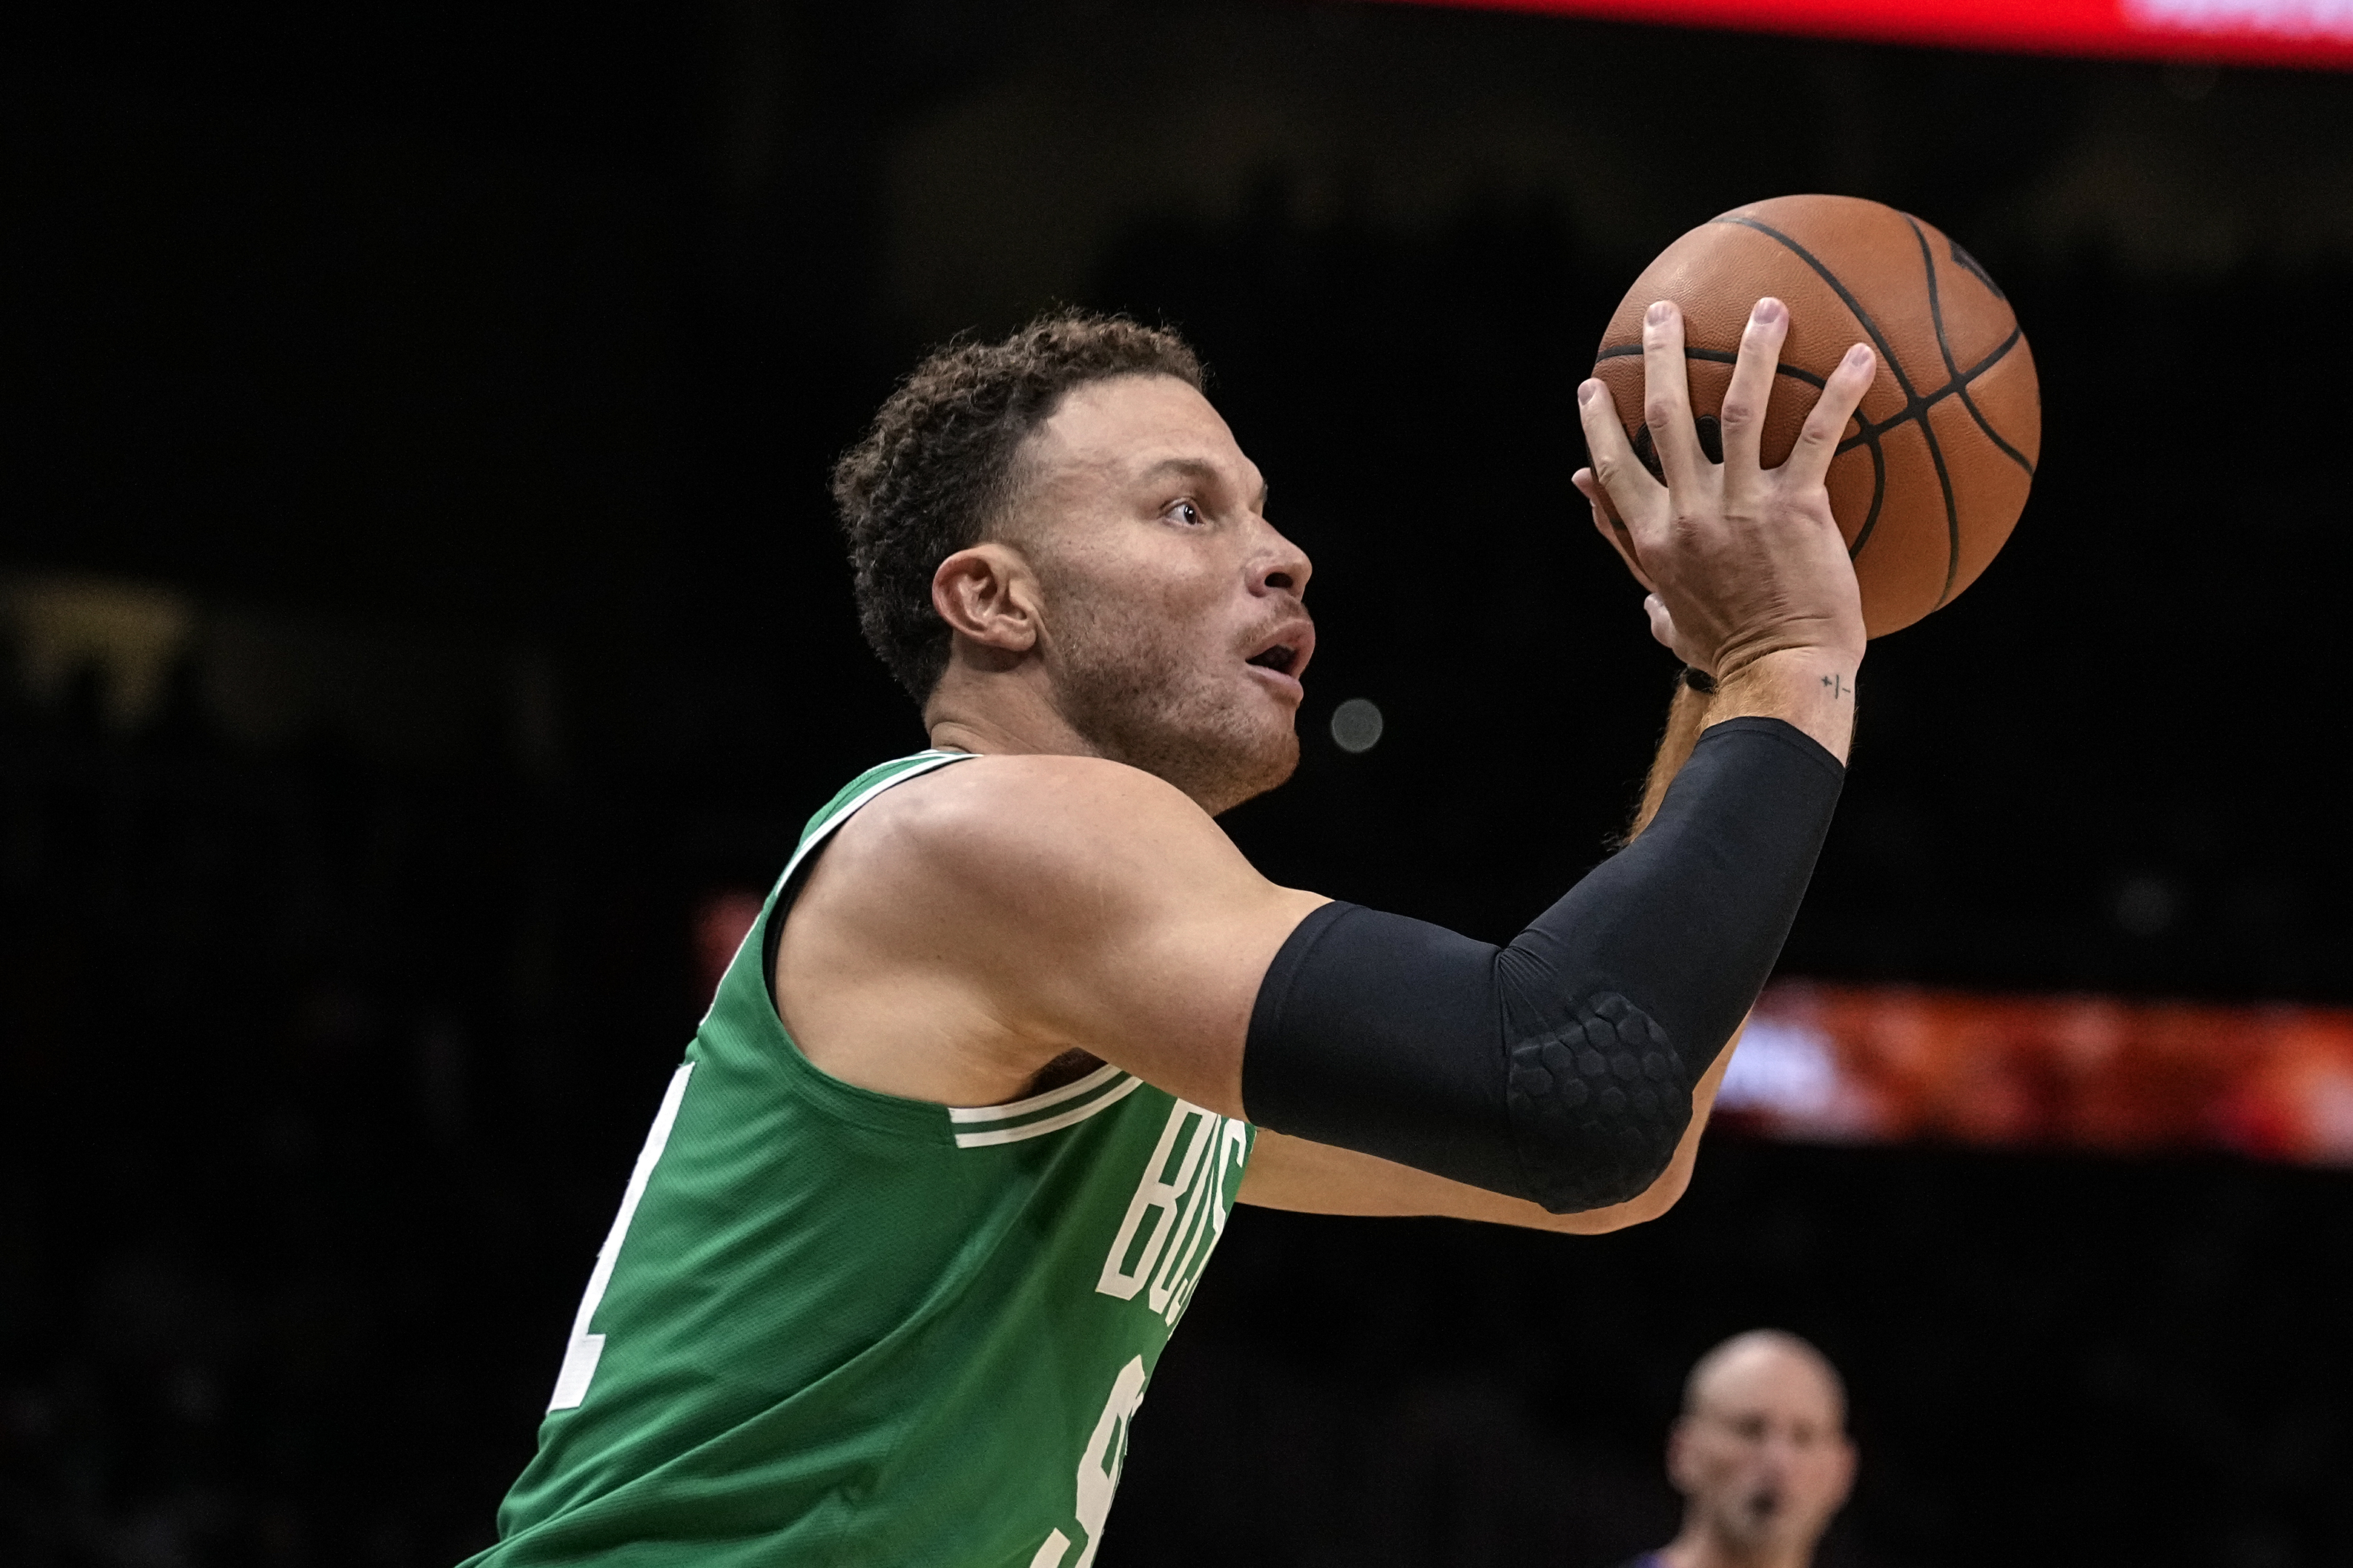 How Celtics' Blake Griffin rejuvenation plan is working to perfection